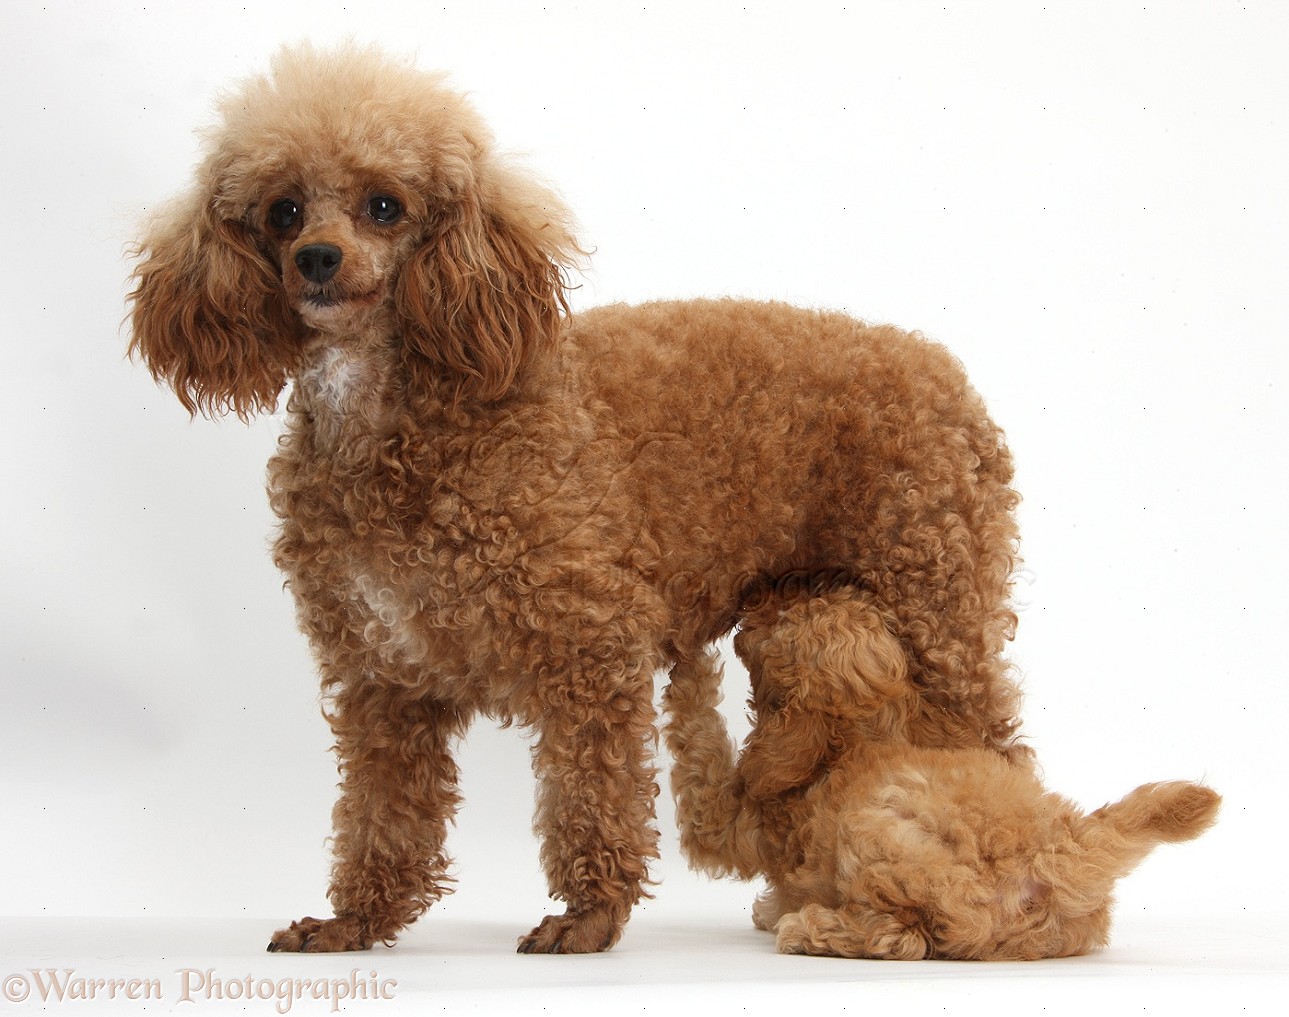 Dogs: Red Toy Poodle puppy suckling its mother photo WP38703